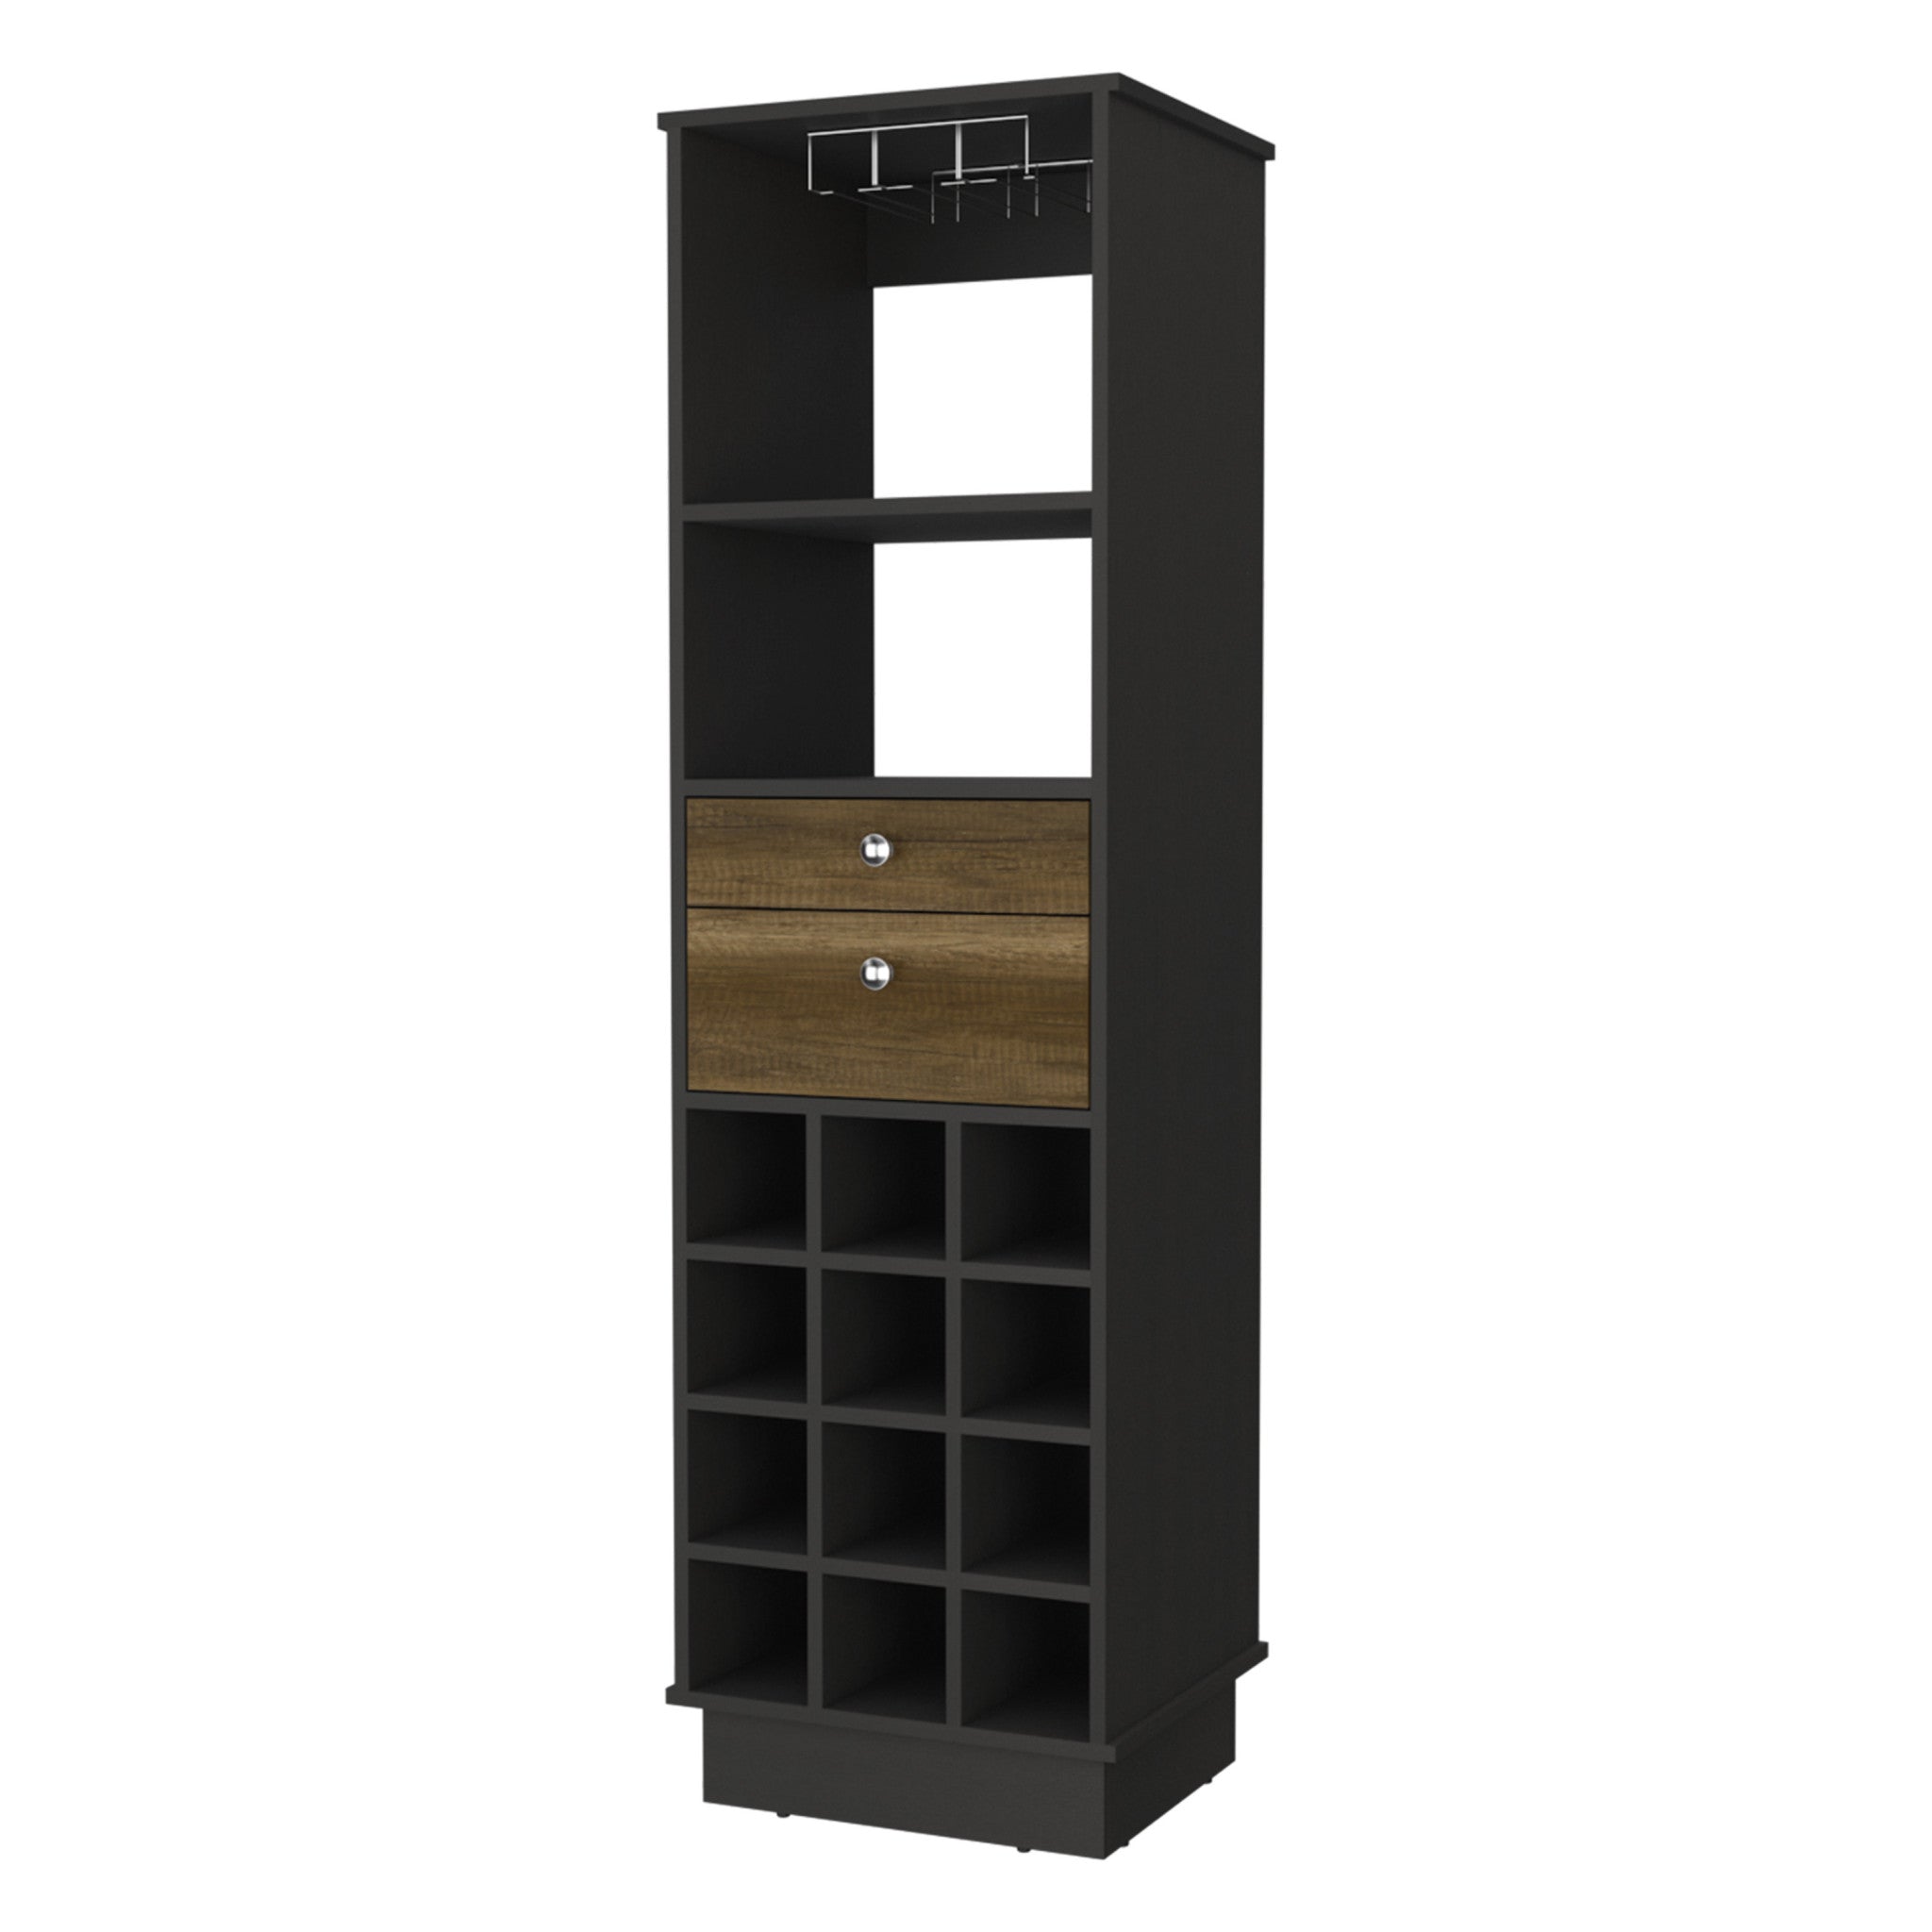 18" Black Bar Cabinet With Two Drawers